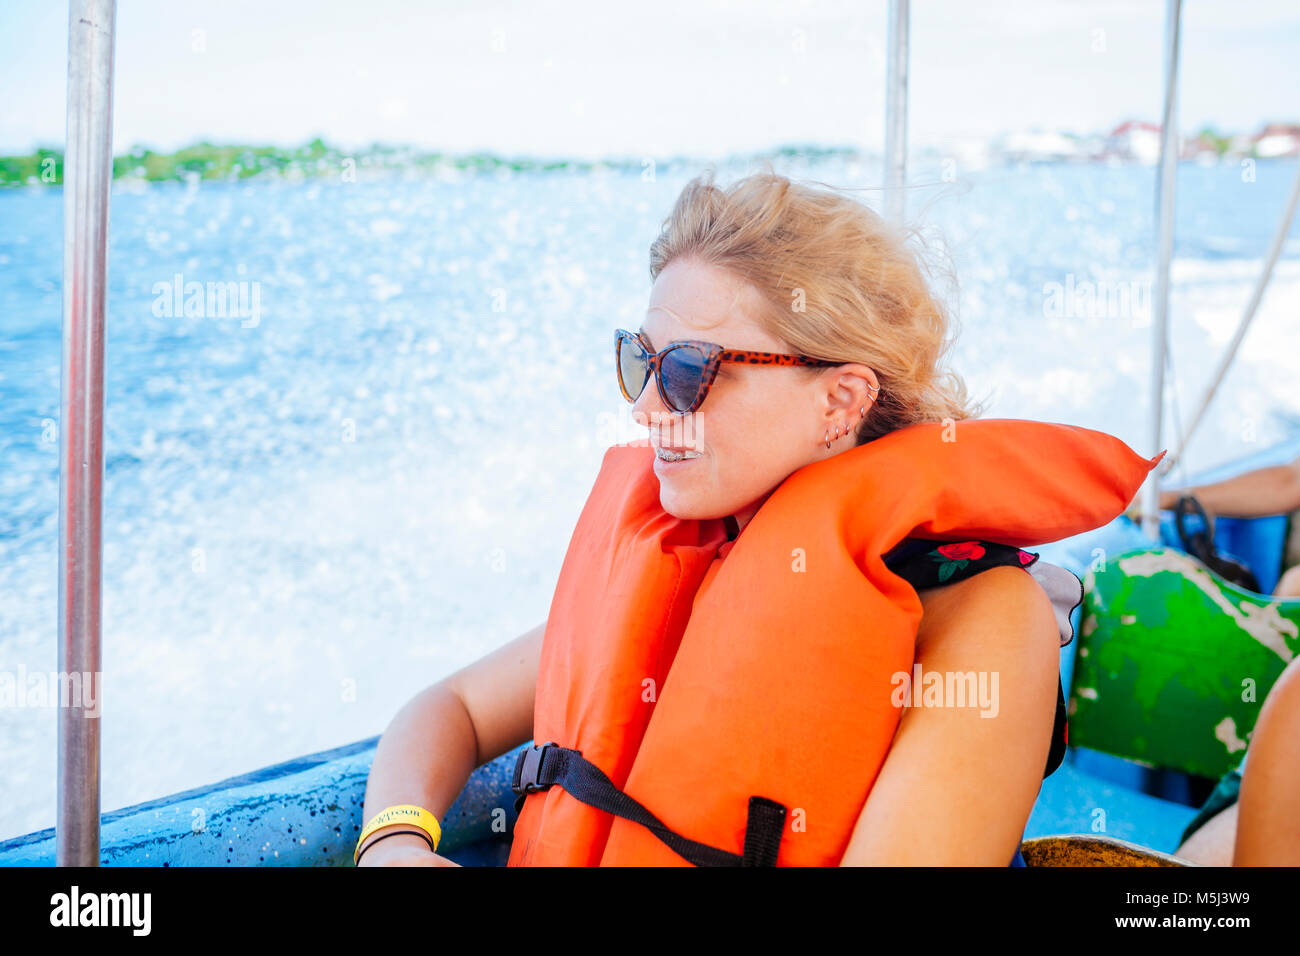 Panama, Woman with life jacket sitting in a boat Stock Photo